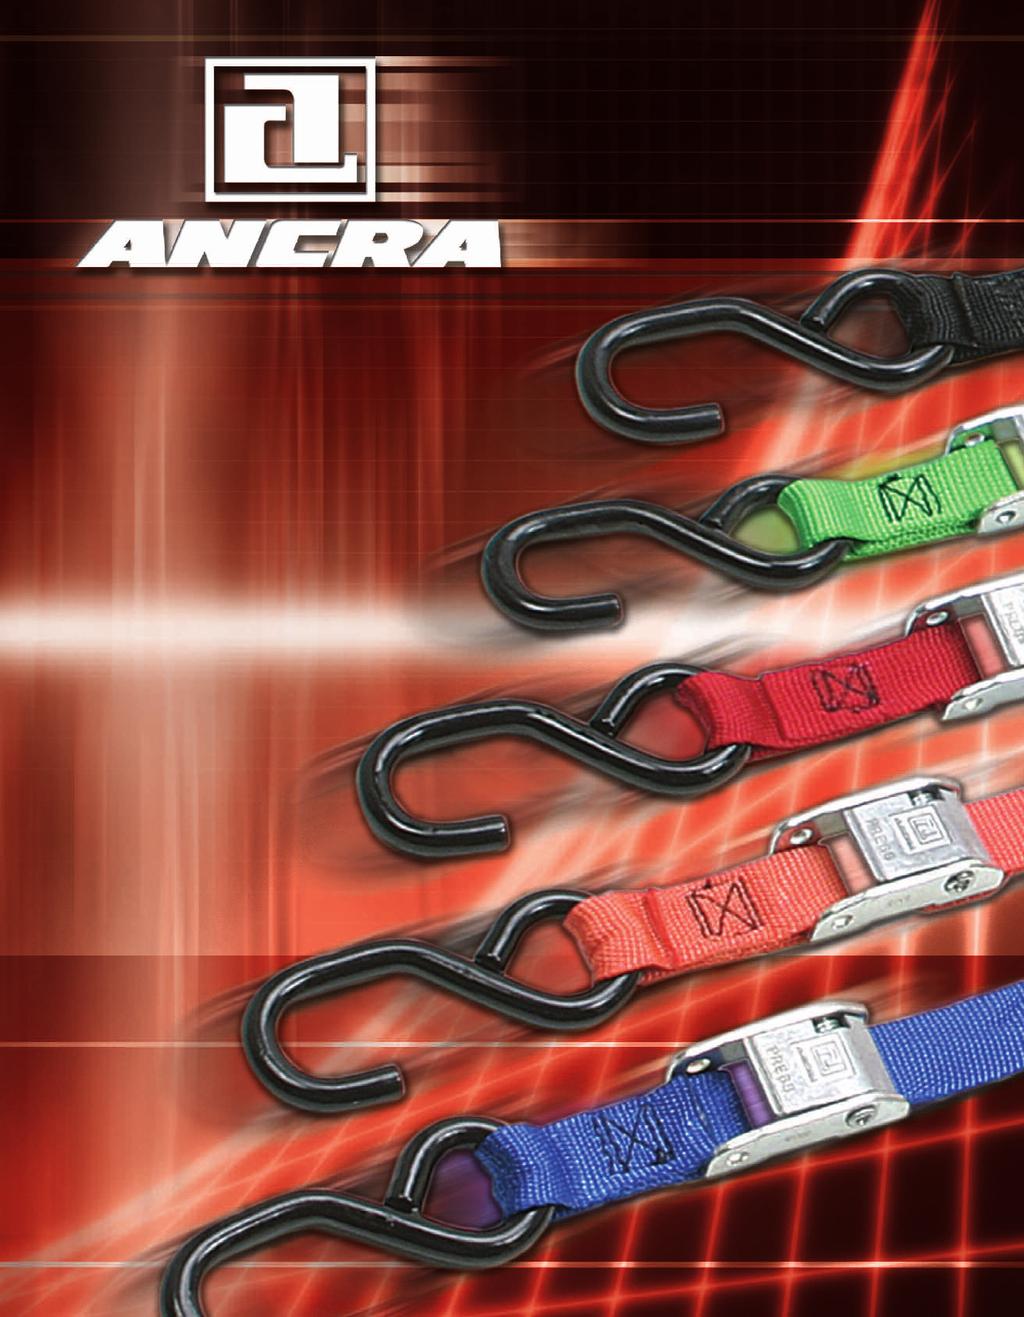 Ancra International Action Sports Products 2685 Circleport Drive Erlanger, KY 41018 USA Phone: 800-233-5138 Fax: 800-347-2627 www.ancra.